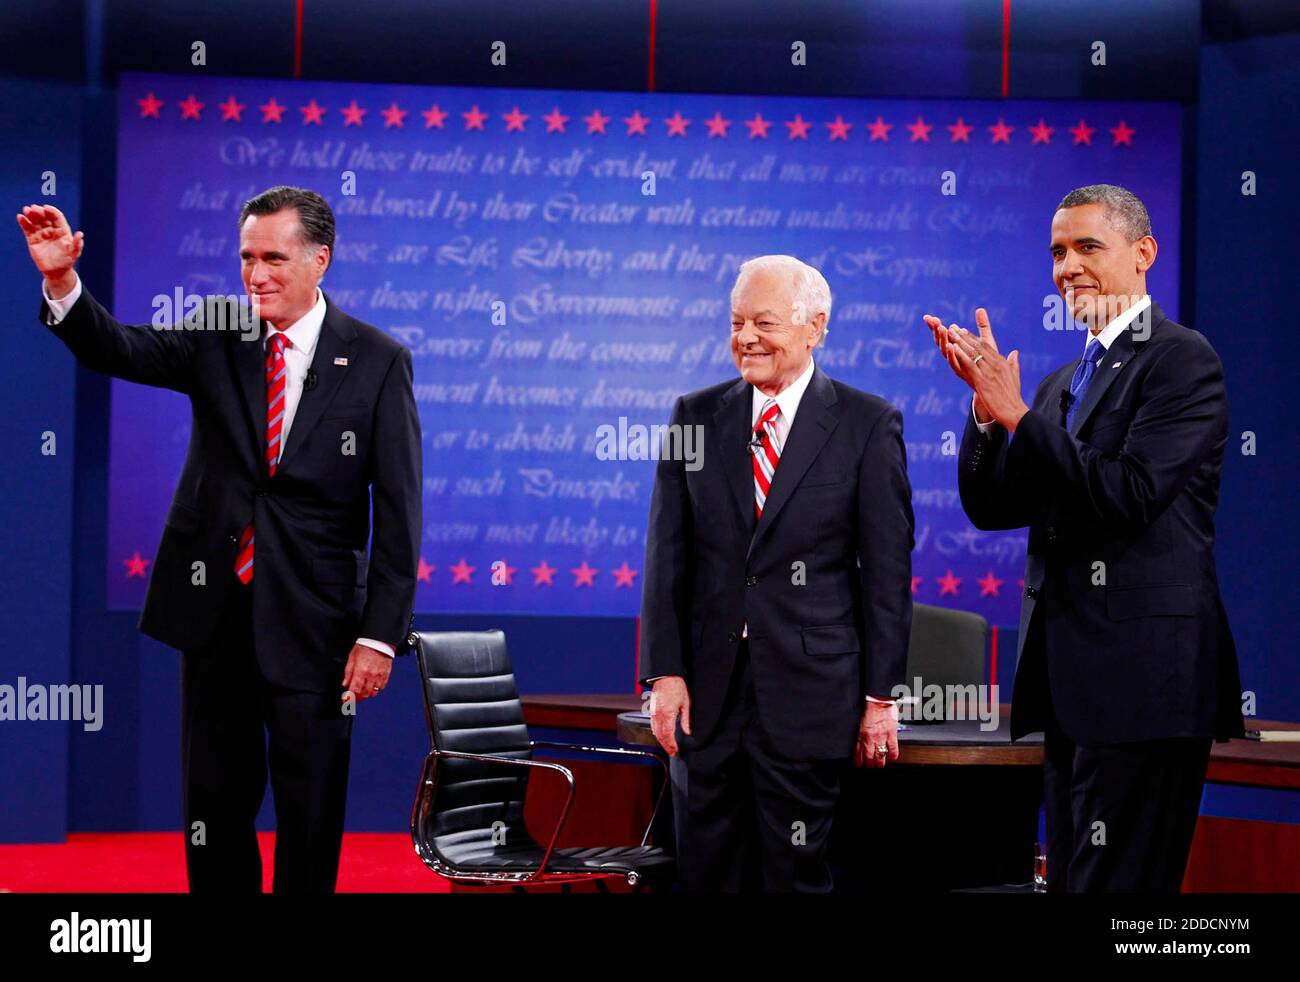 NO FILM, NO VIDEO, NO TV, NO DOCUMENTARY - Republican presidential nominee Mitt Romney, left, and President Barack Obama, right, participate in a presidential debate with moderator Bob Schieffer at Lynn University in Boca Raton, Florida, USA, on Monday, October 22, 2012. Photo by Richard Graulich/Palm Beach Post/MCT/ABACAPRESS.COM Stock Photo